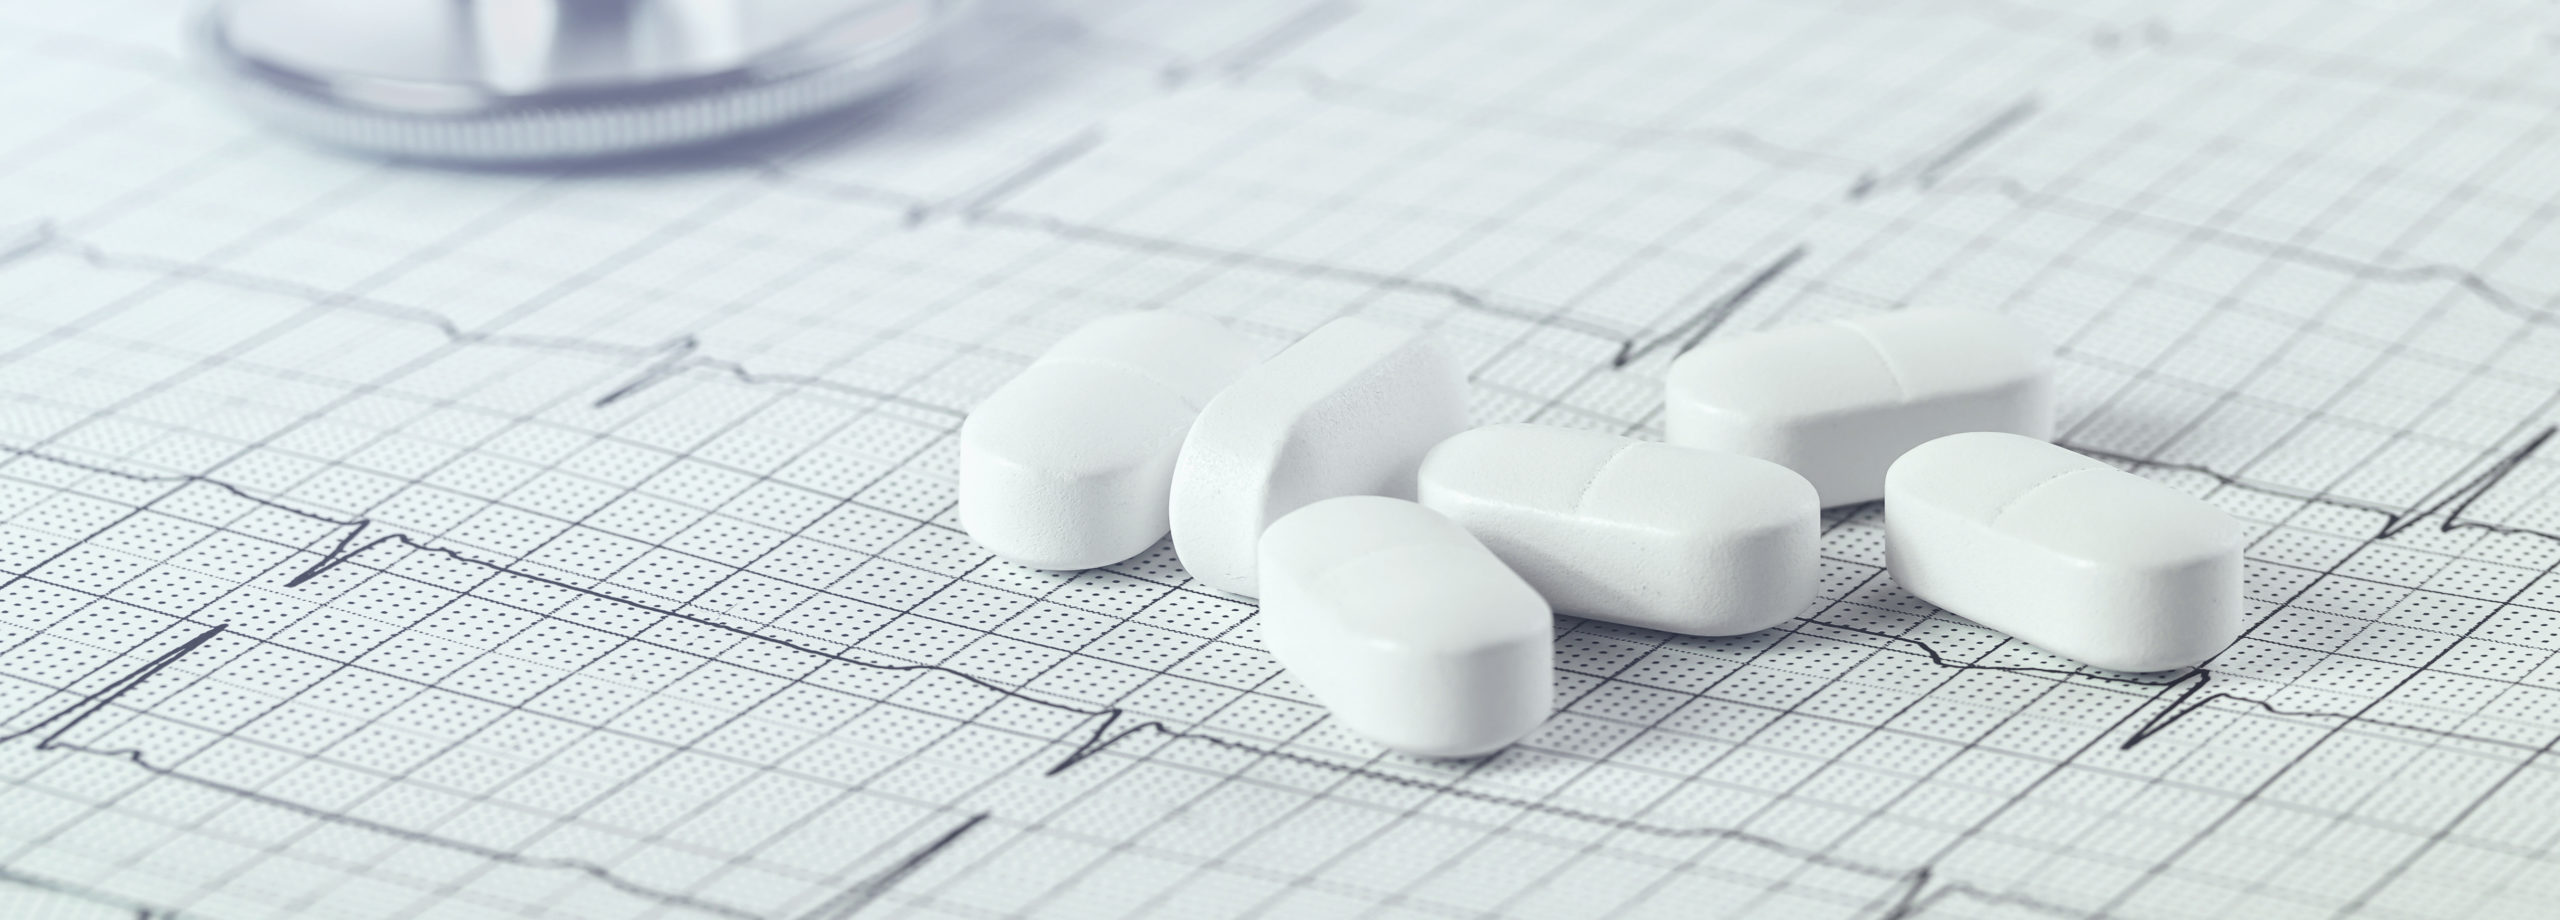 Identifying, Preventing and Managing Heart Rhythm Side Effects of Medicines